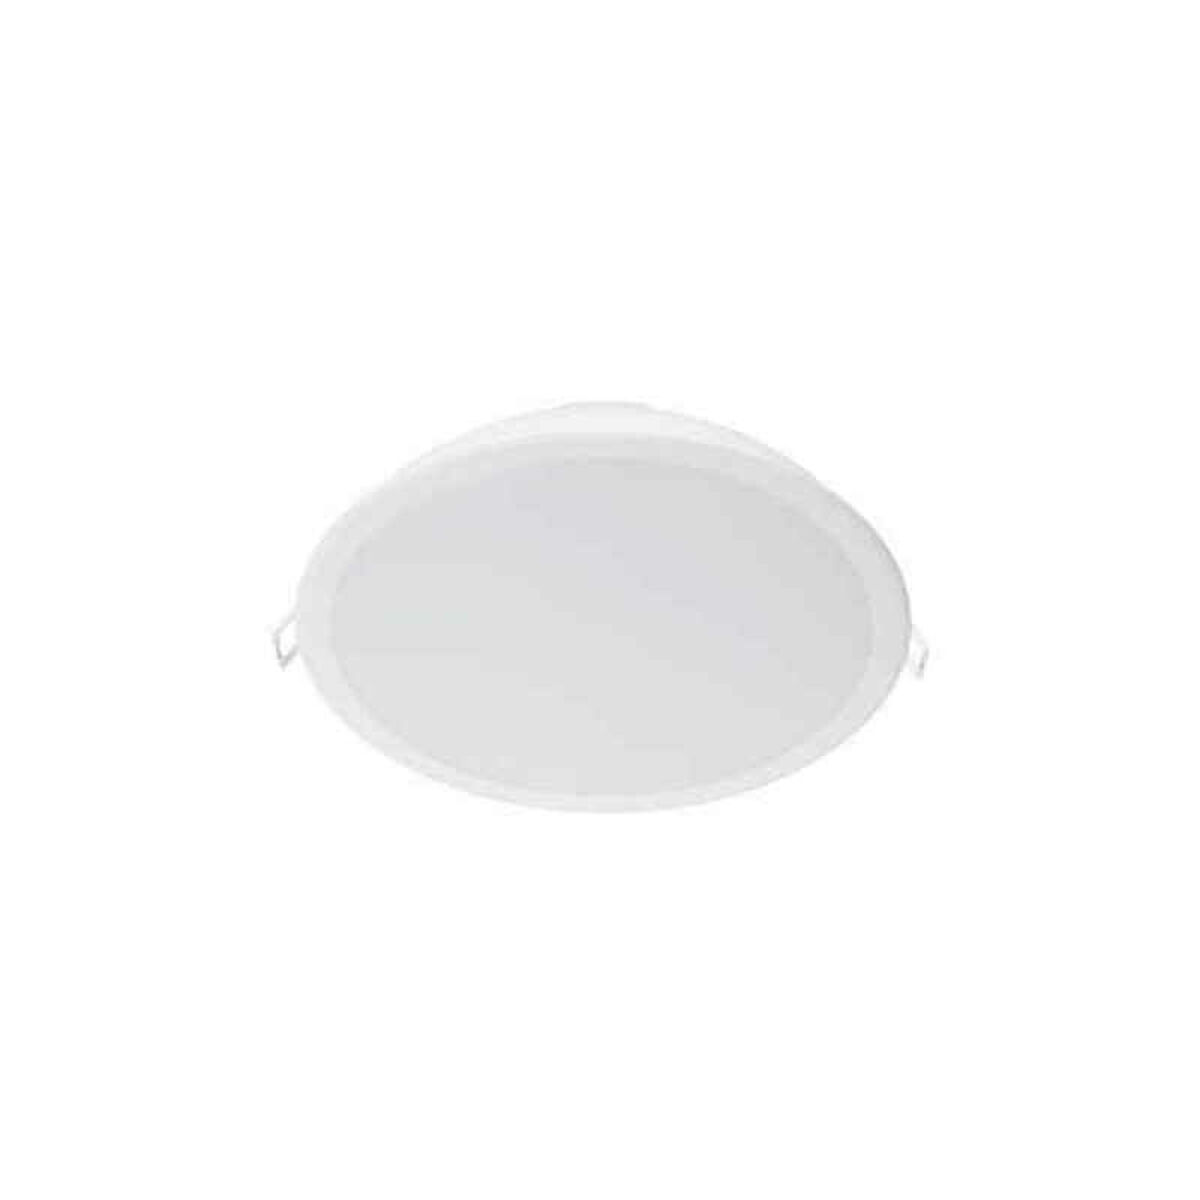 LED-Lampe Philips meson Weiß 4000 K 550 lm (21,5 x 10,5 cm)